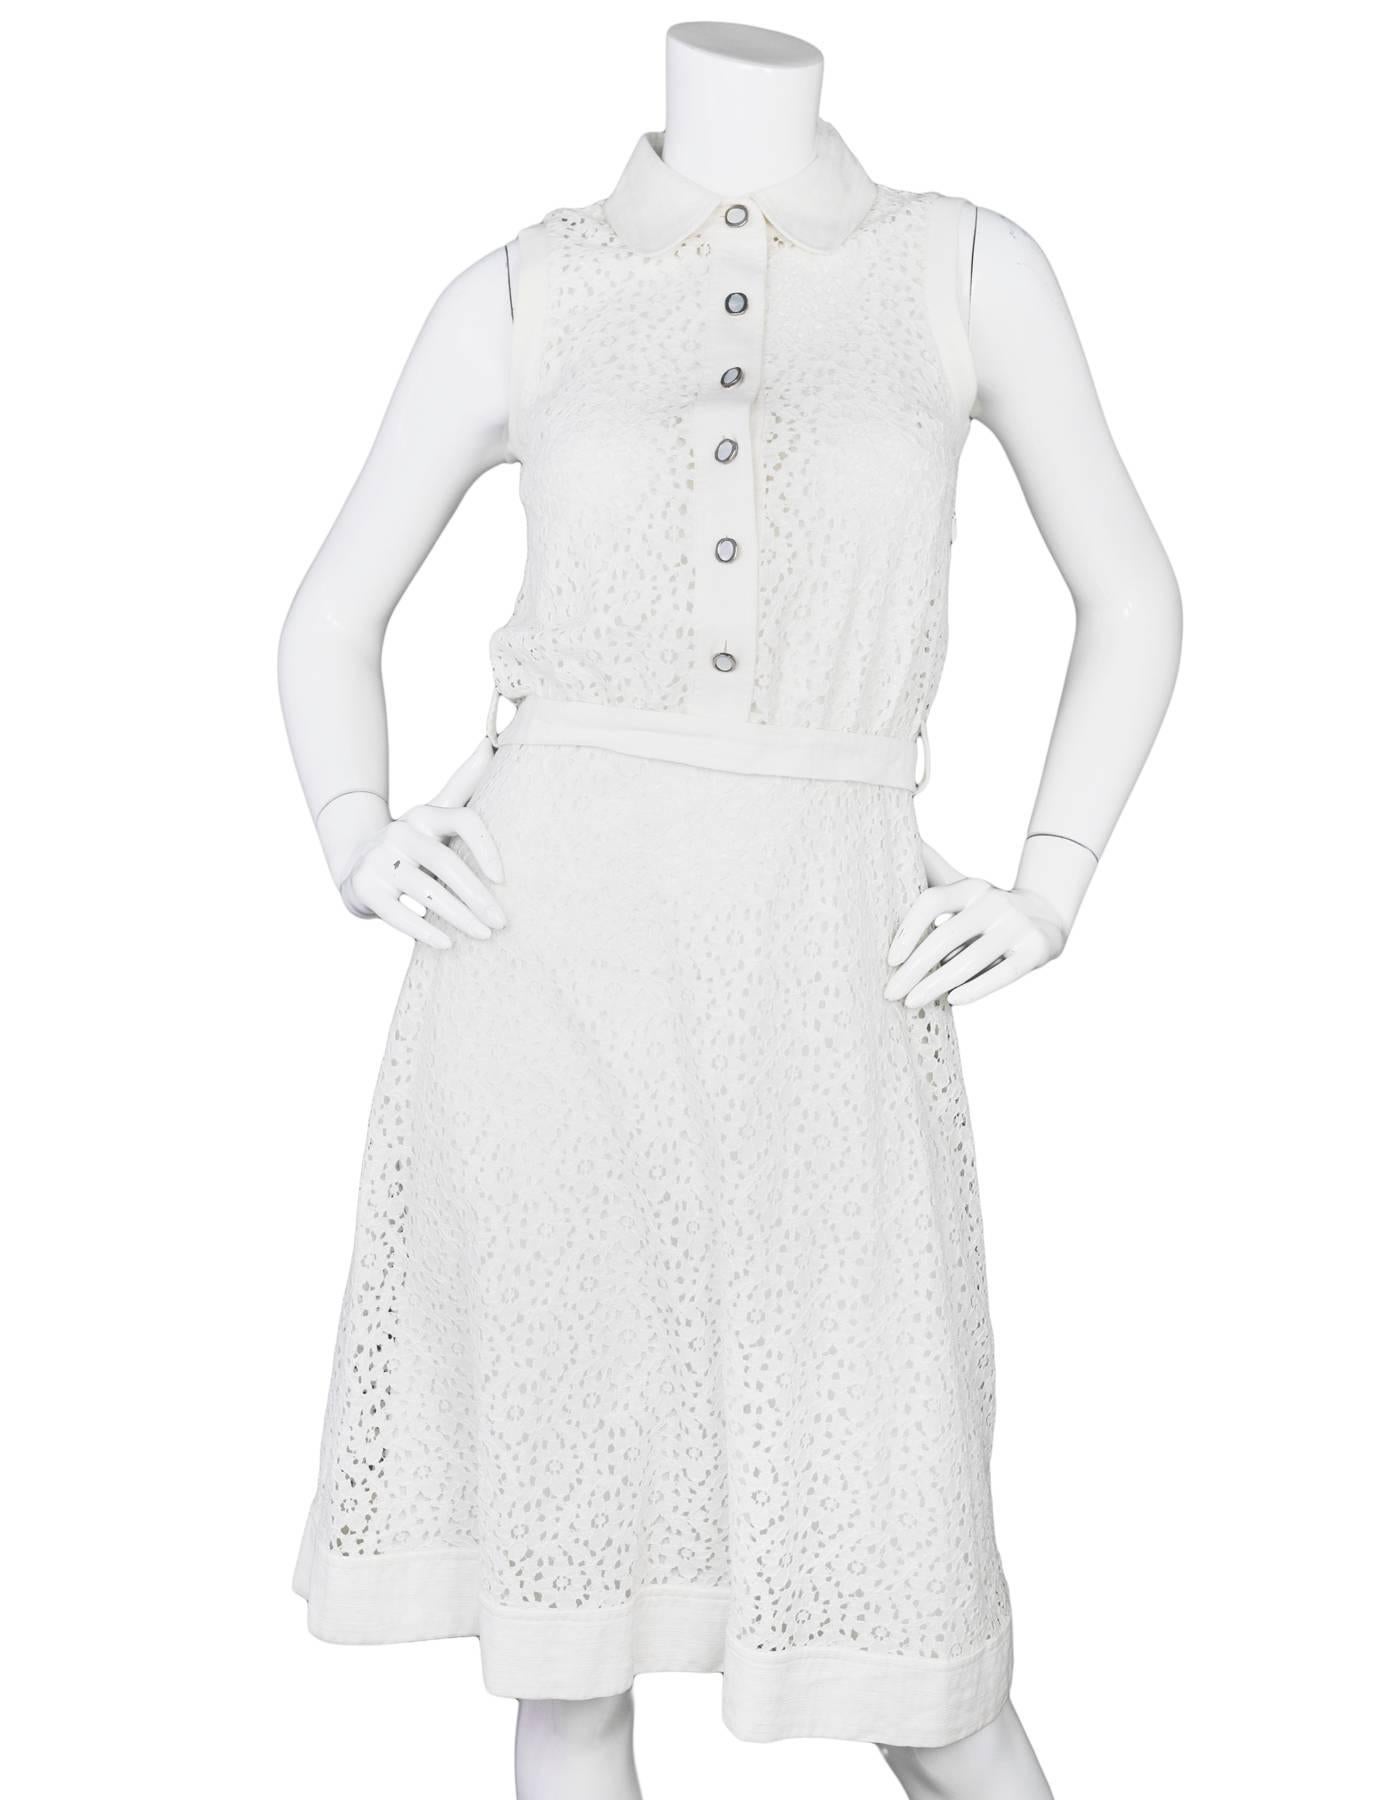 D&G White Eyelet Dress Sz IT38

Made In: China
Color: White
Composition: 80% cotton, 10% nylon, 10% polyester
Lining: White underslip
Closure/Opening: Side zip closure
Exterior Pockets: None
Interior Pockets: None
Overall Condition: Excellent